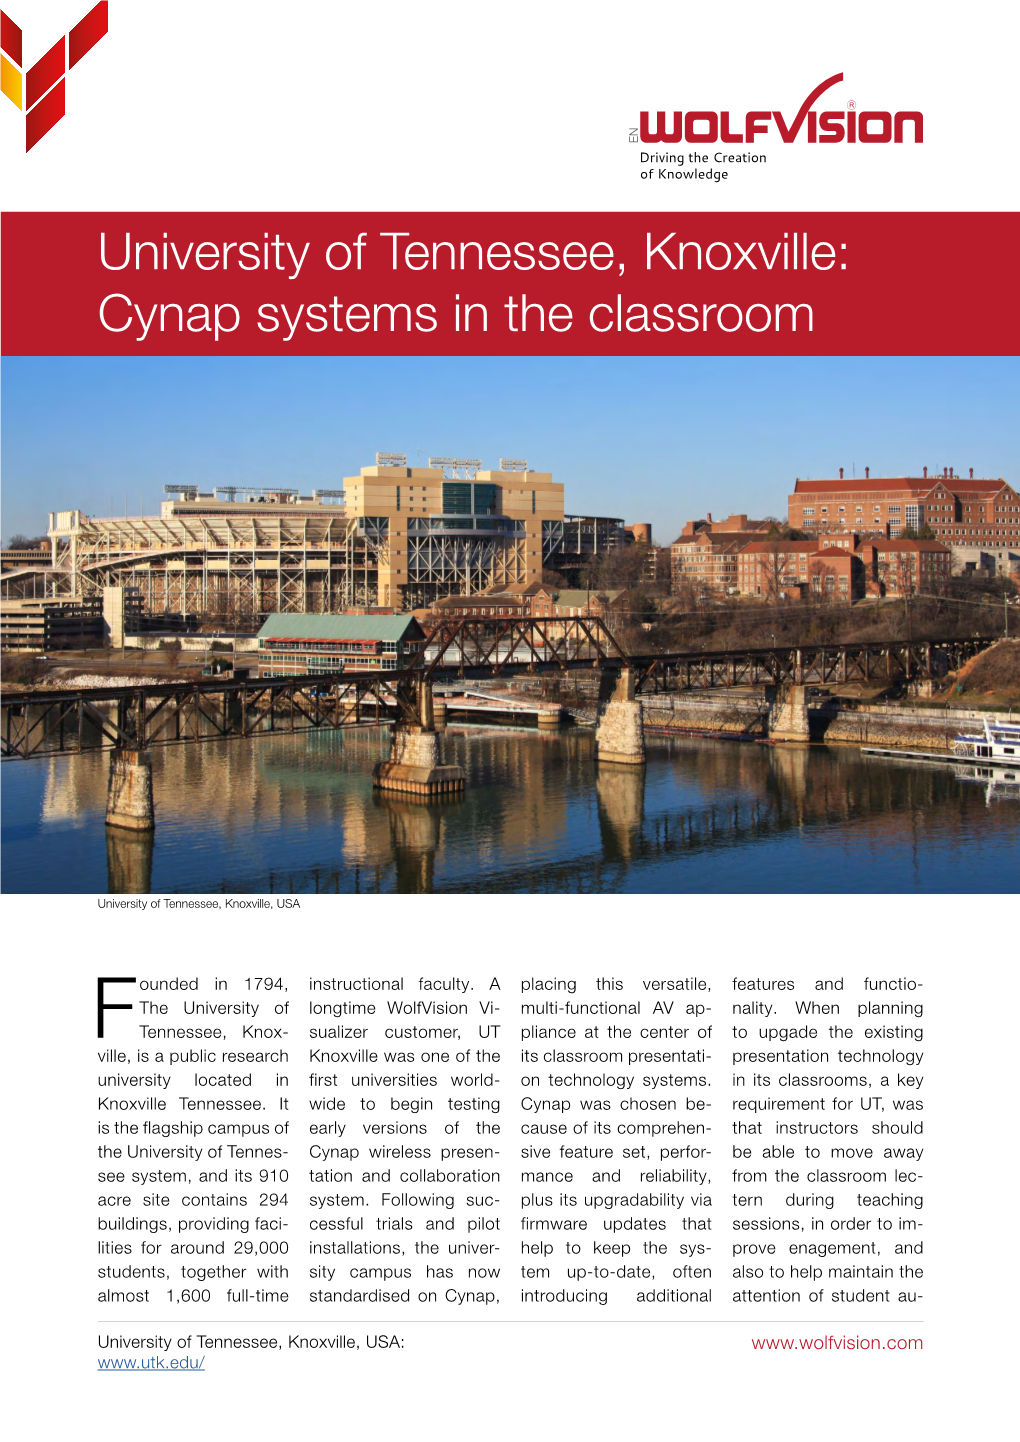 University of Tennessee, Knoxville: Cynap Systems in the Classroom